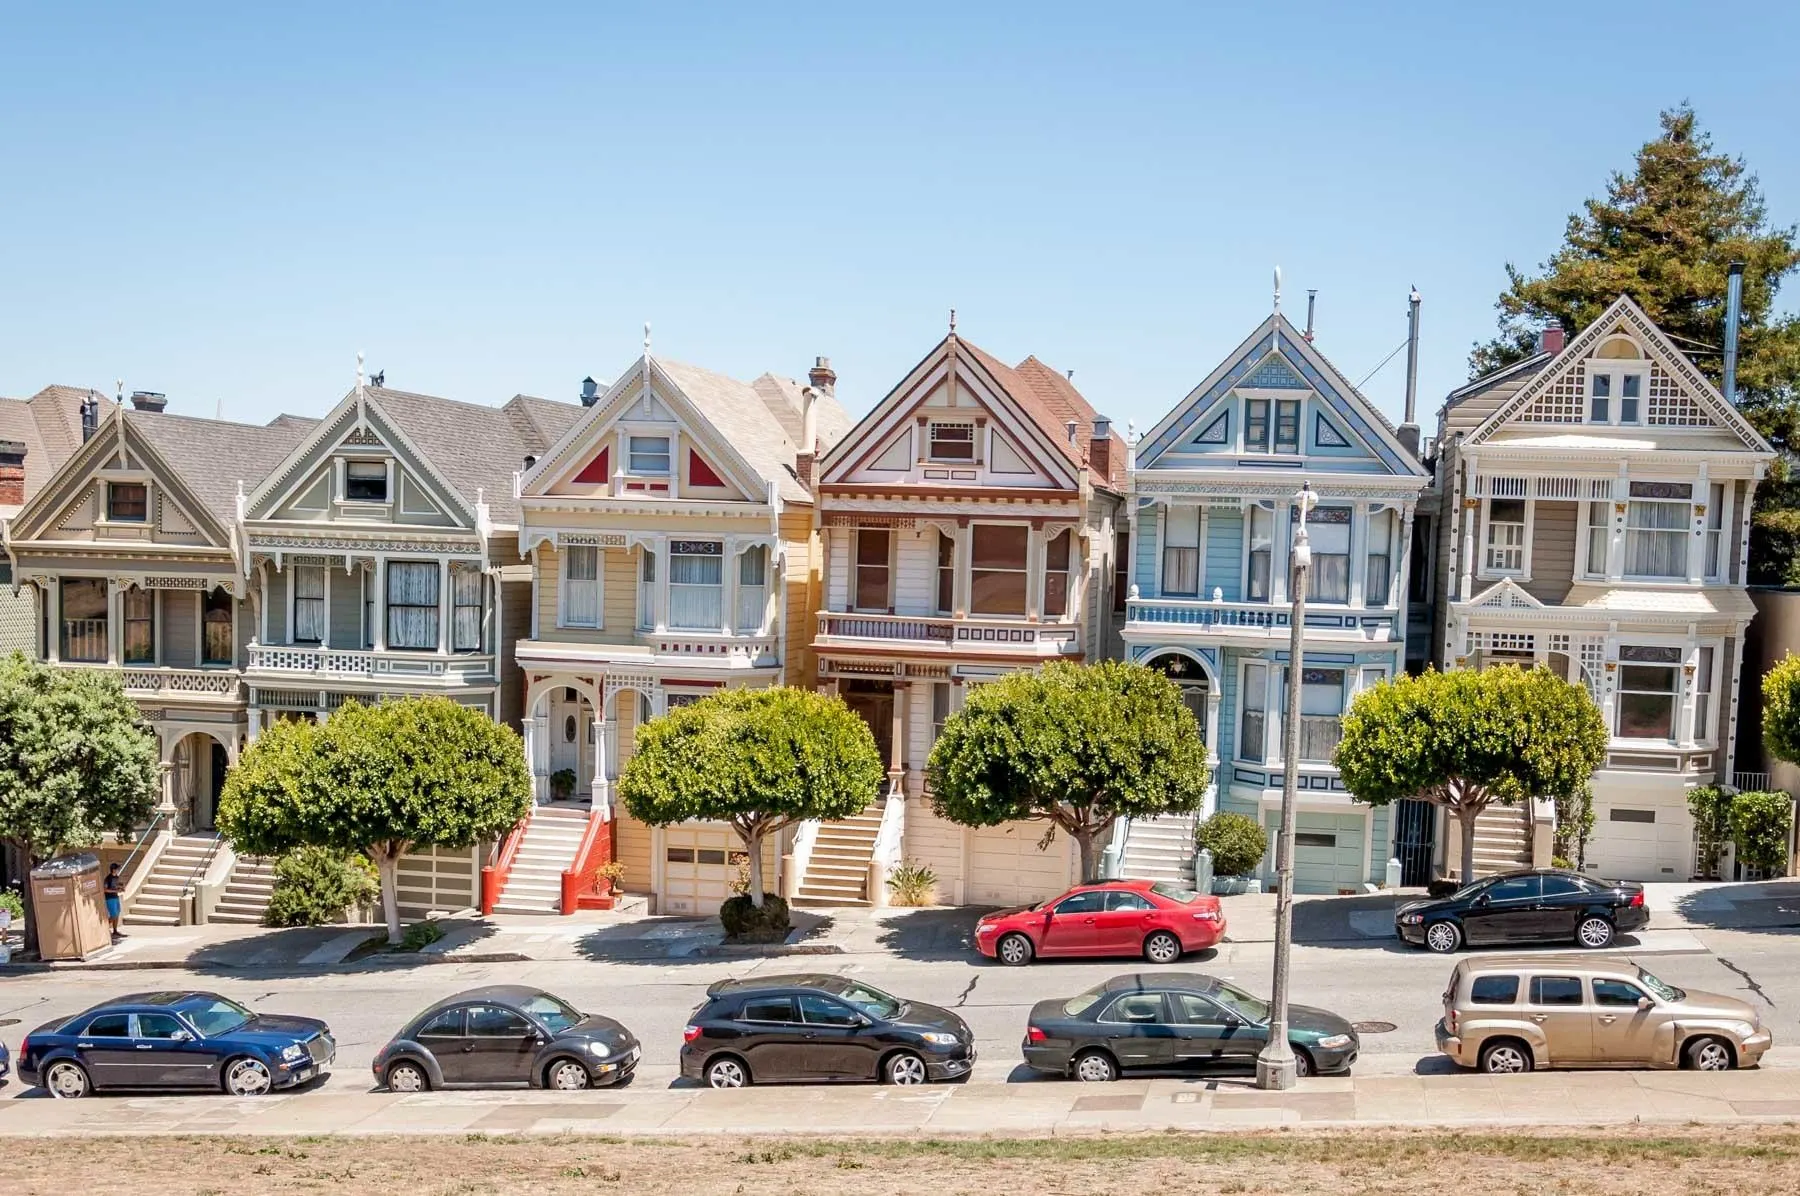 Brightly-painted Victorian homes in San Francisco known as the Painted Ladies